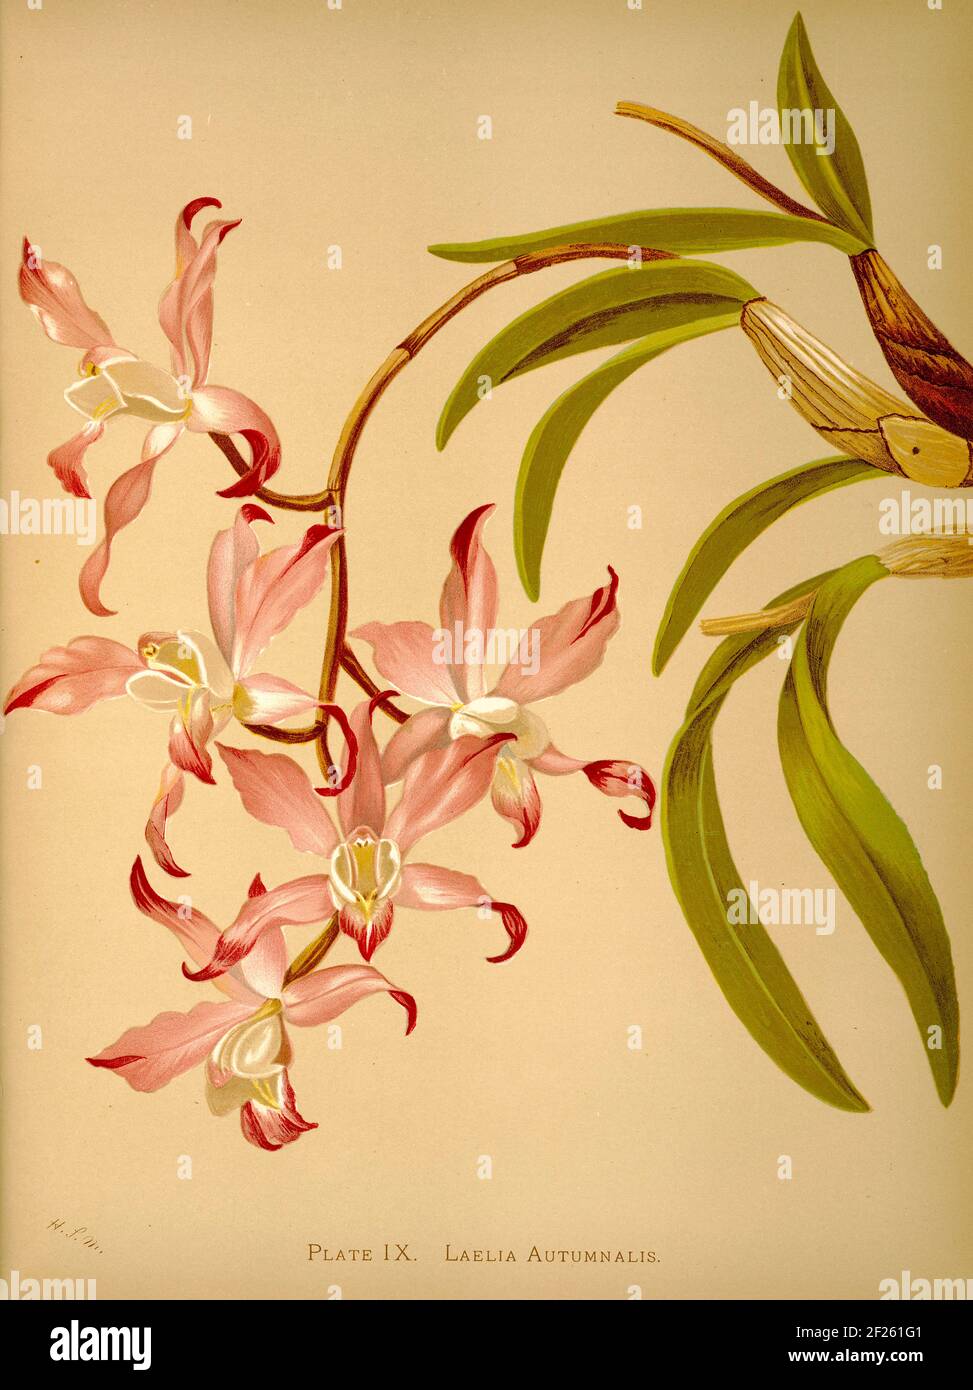 Harriet Stewart Miner's botanical vintage illustration from Orchids - The Royal Family of Plants from 1885 - Laelia autumnalis Stock Photo